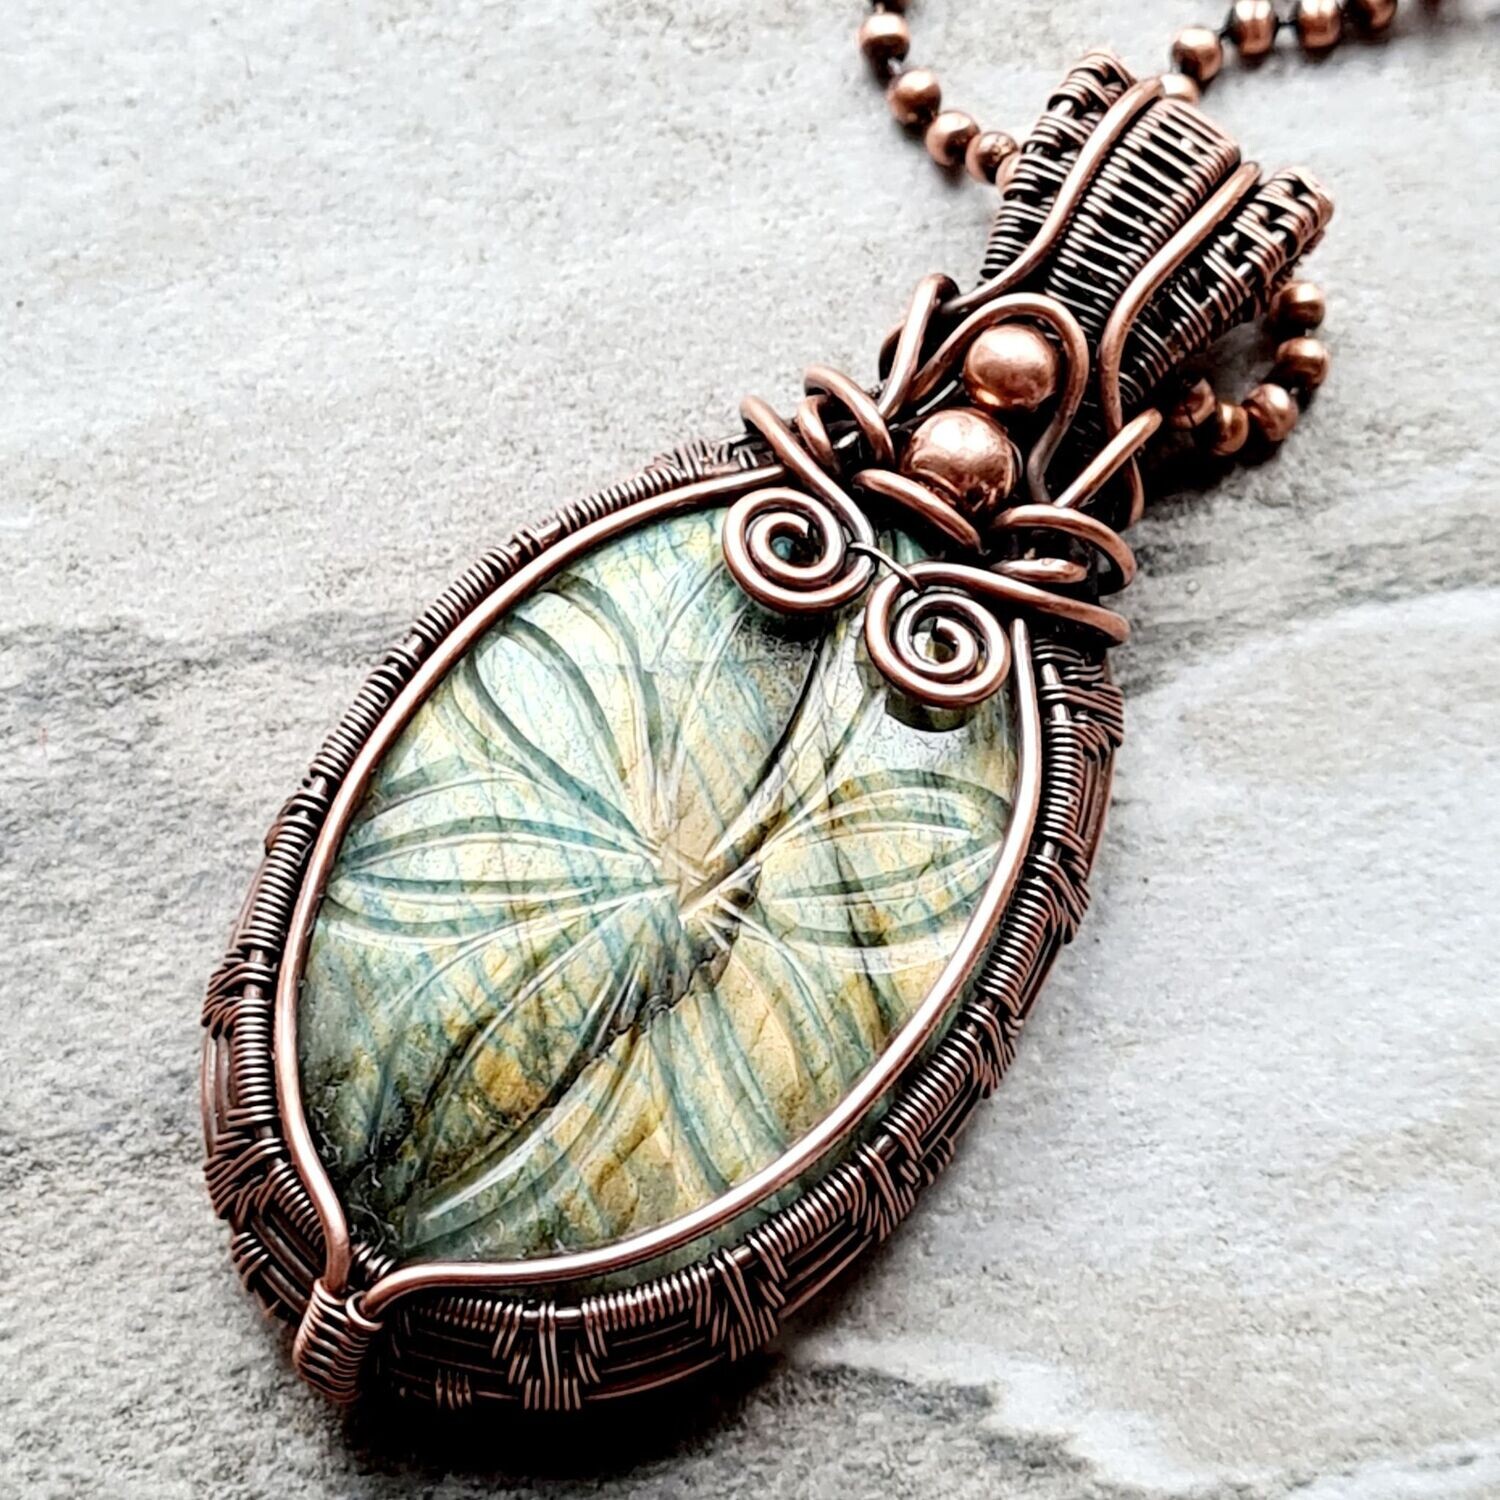 Carved Labradorite with beads pendant with chain.